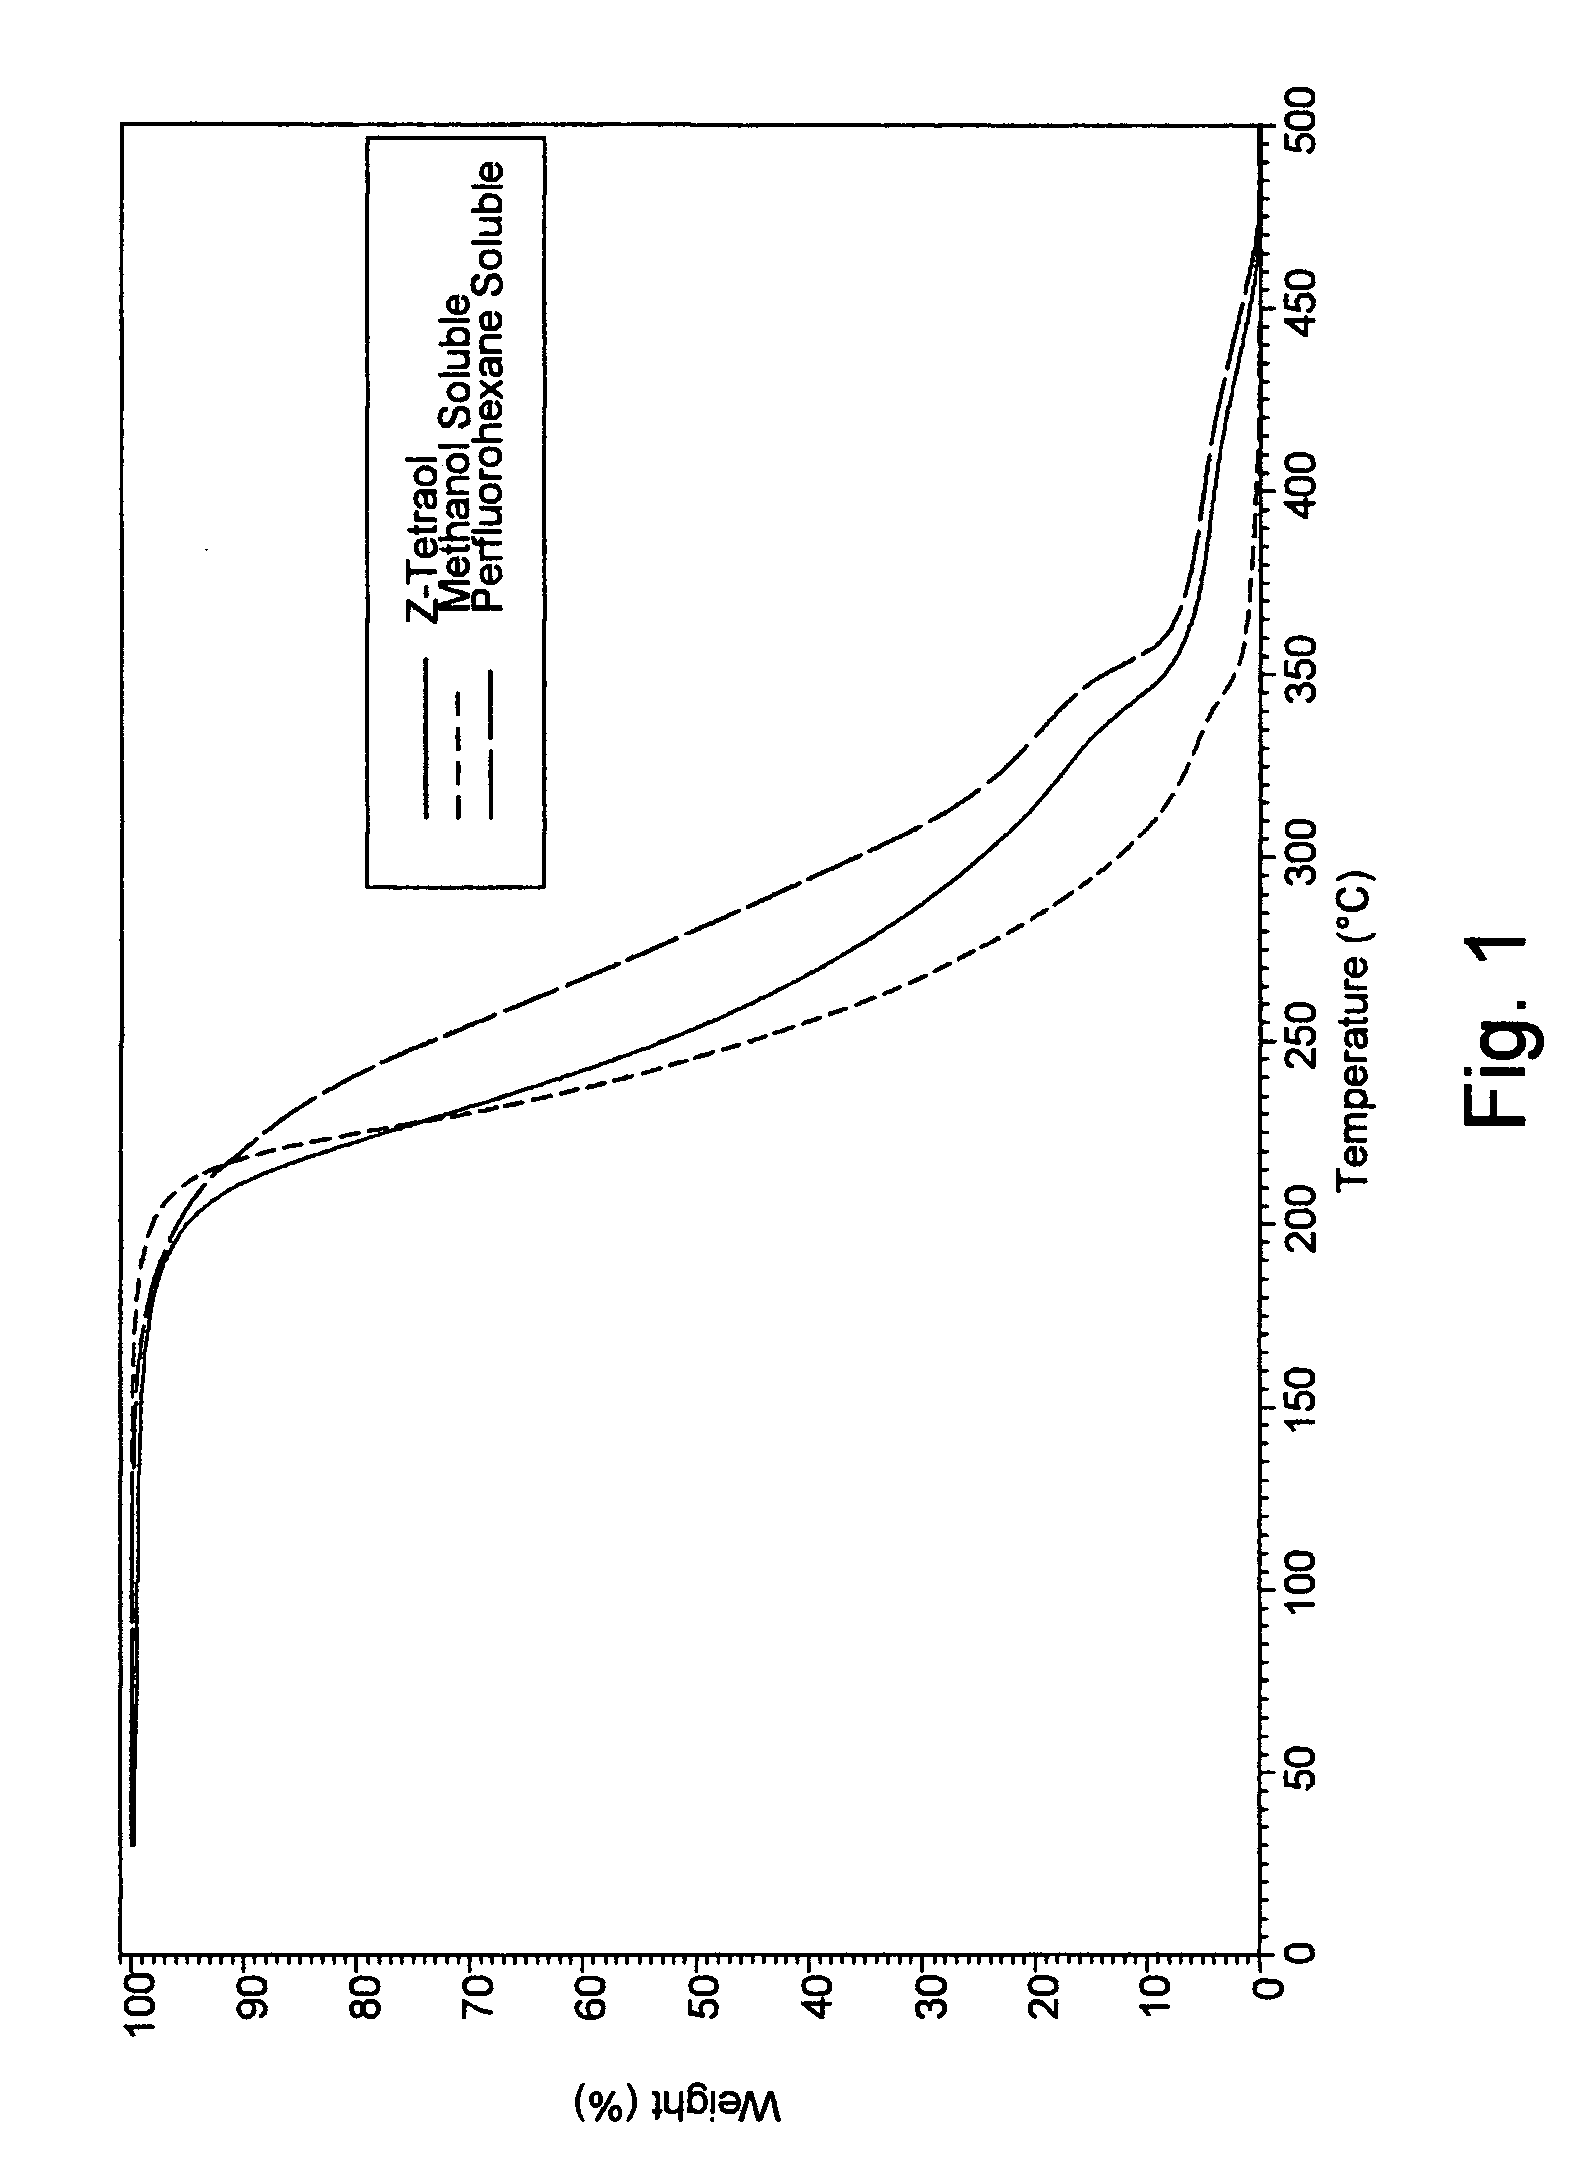 Method for liquid/liquid extraction of molecular weight fractions of perfluorinated polyethers